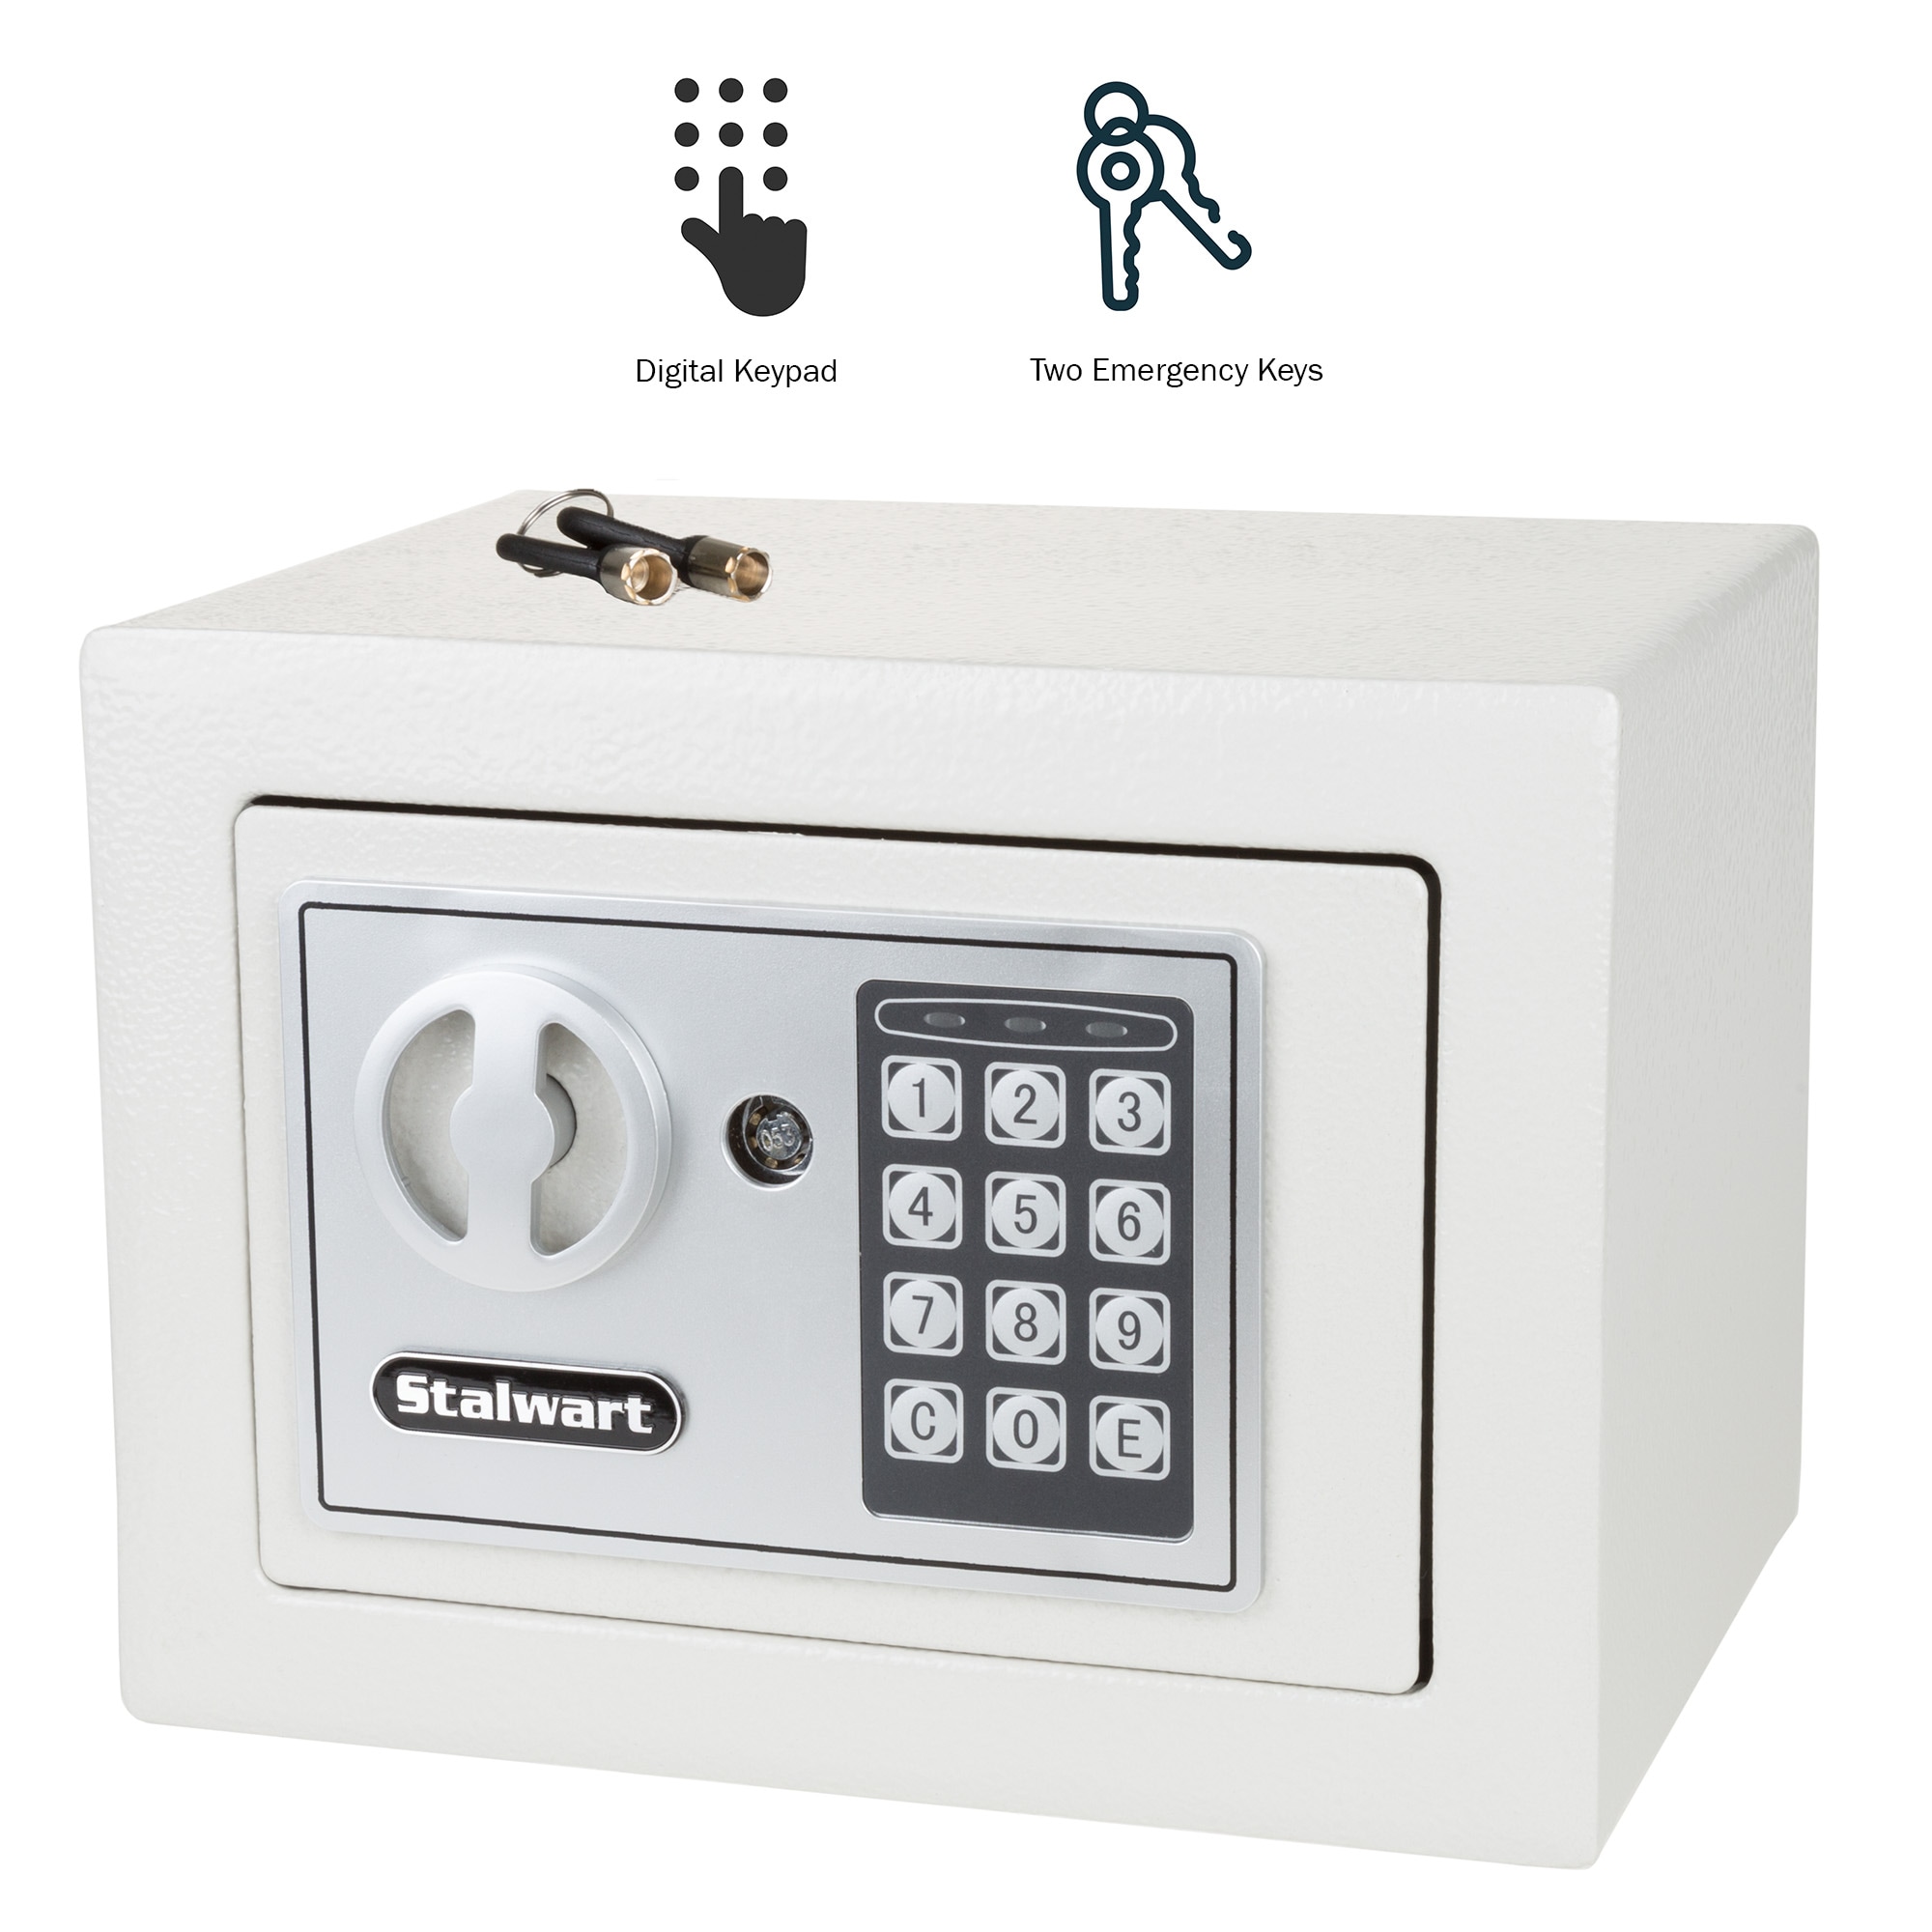 Secure It Security Personal Lockbox Safe Secure Firearms and Valuables 